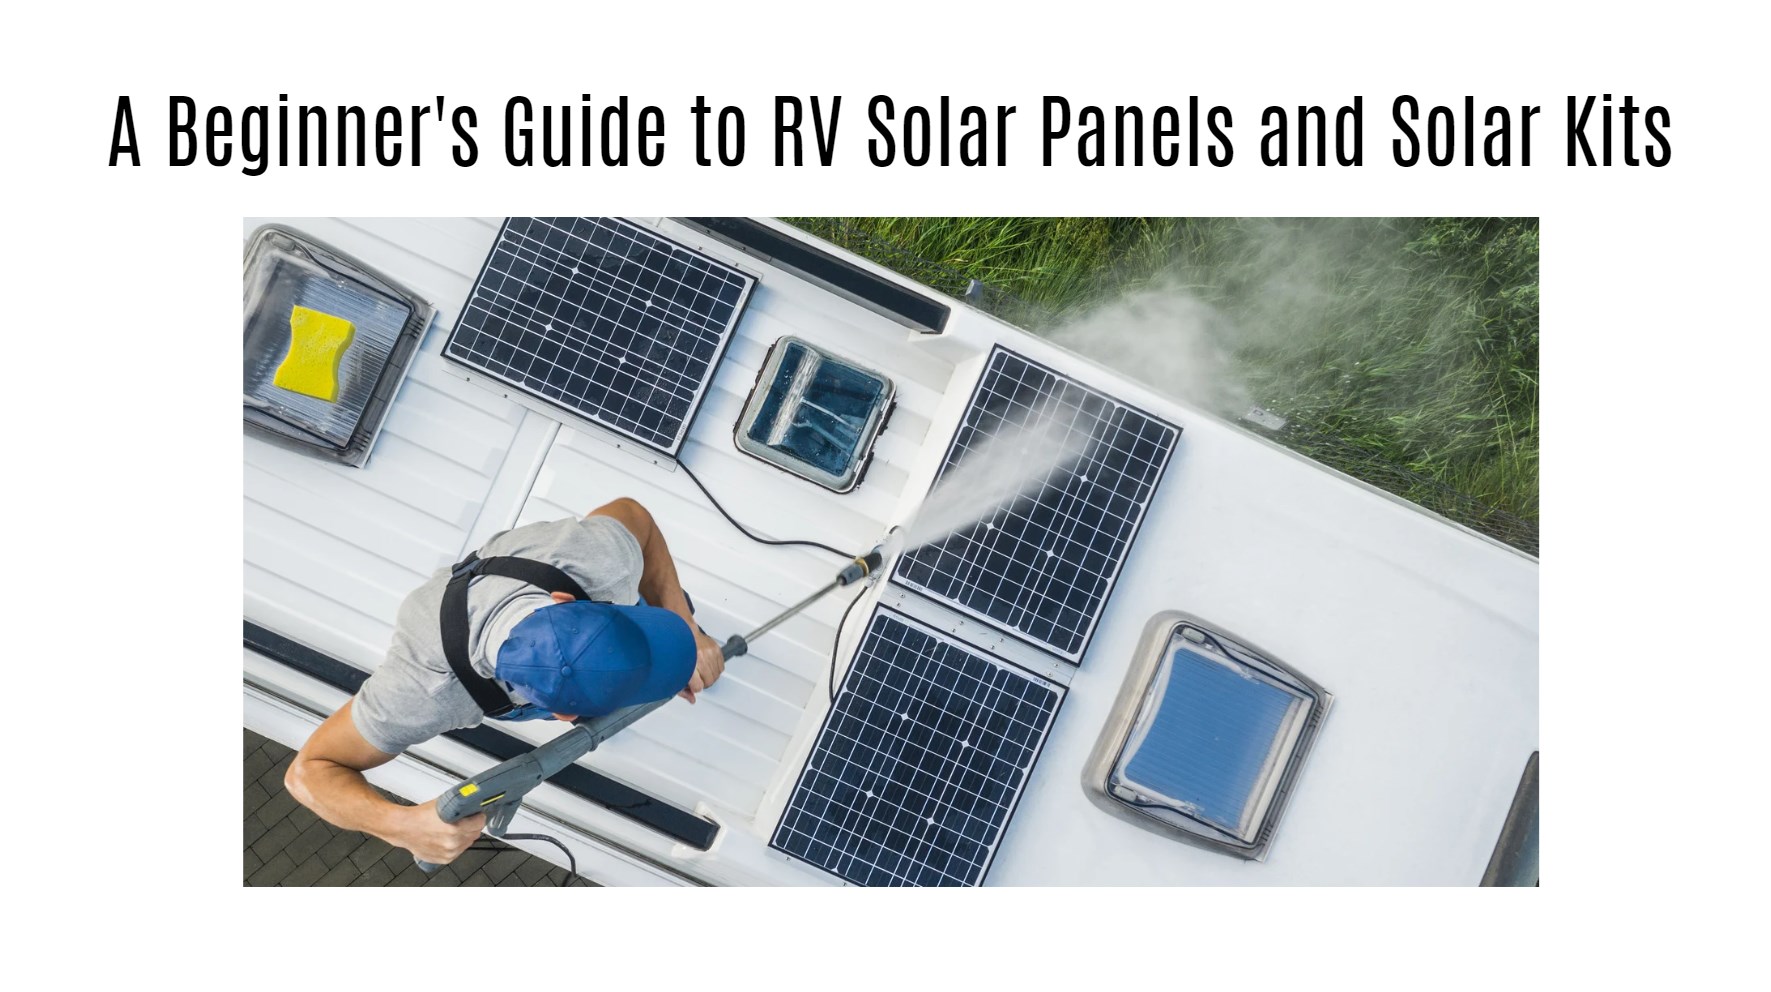 A Beginner's Guide to RV Solar Panels and Solar Kits